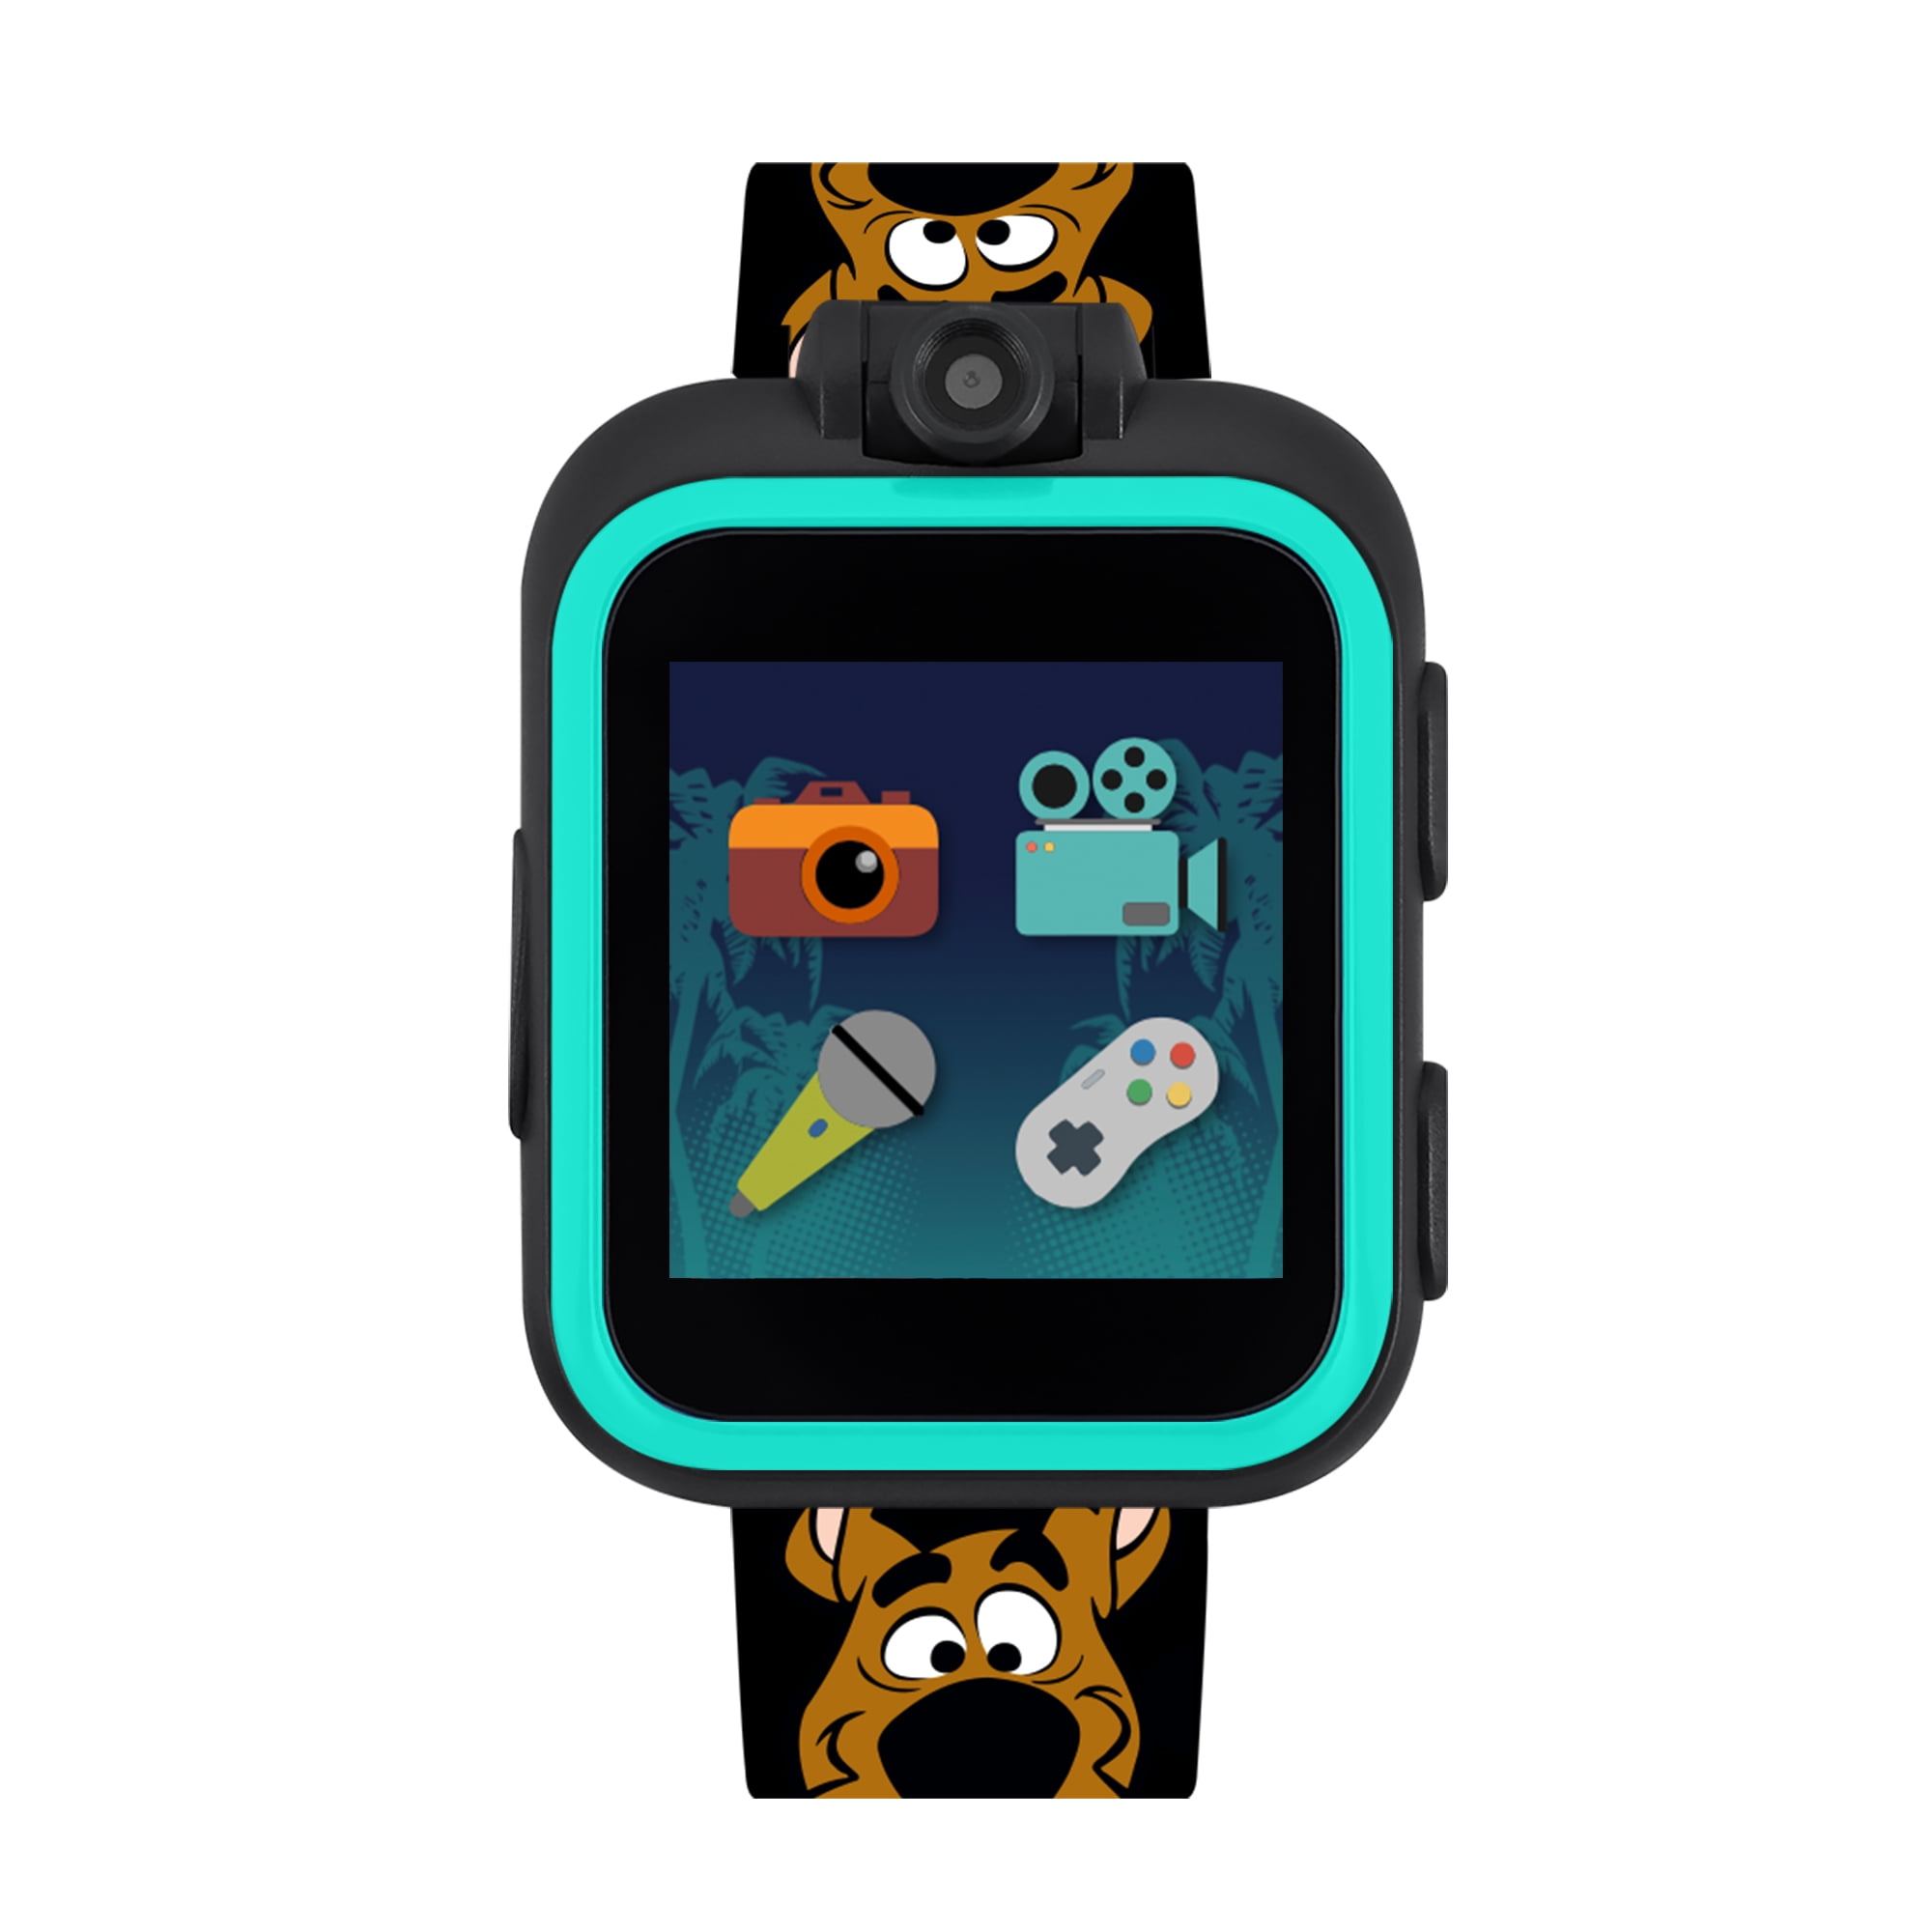 PlayZoom kids Smartwatch - Video and Camera Selfies for Kids Toddlers Boys Girls Prints - Walmart.com